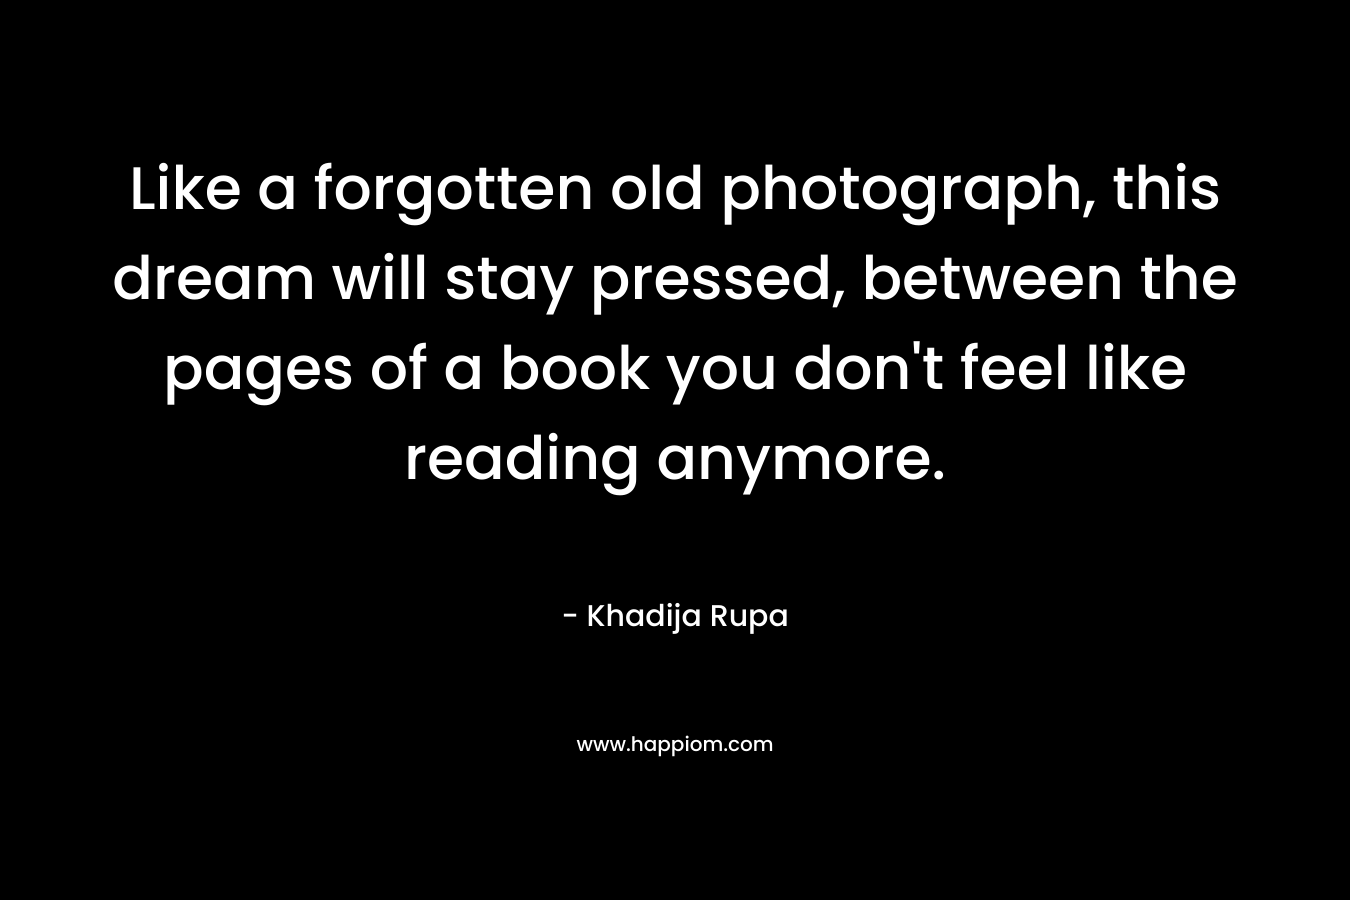 Like a forgotten old photograph, this dream will stay pressed, between the pages of a book you don’t feel like reading anymore. – Khadija Rupa